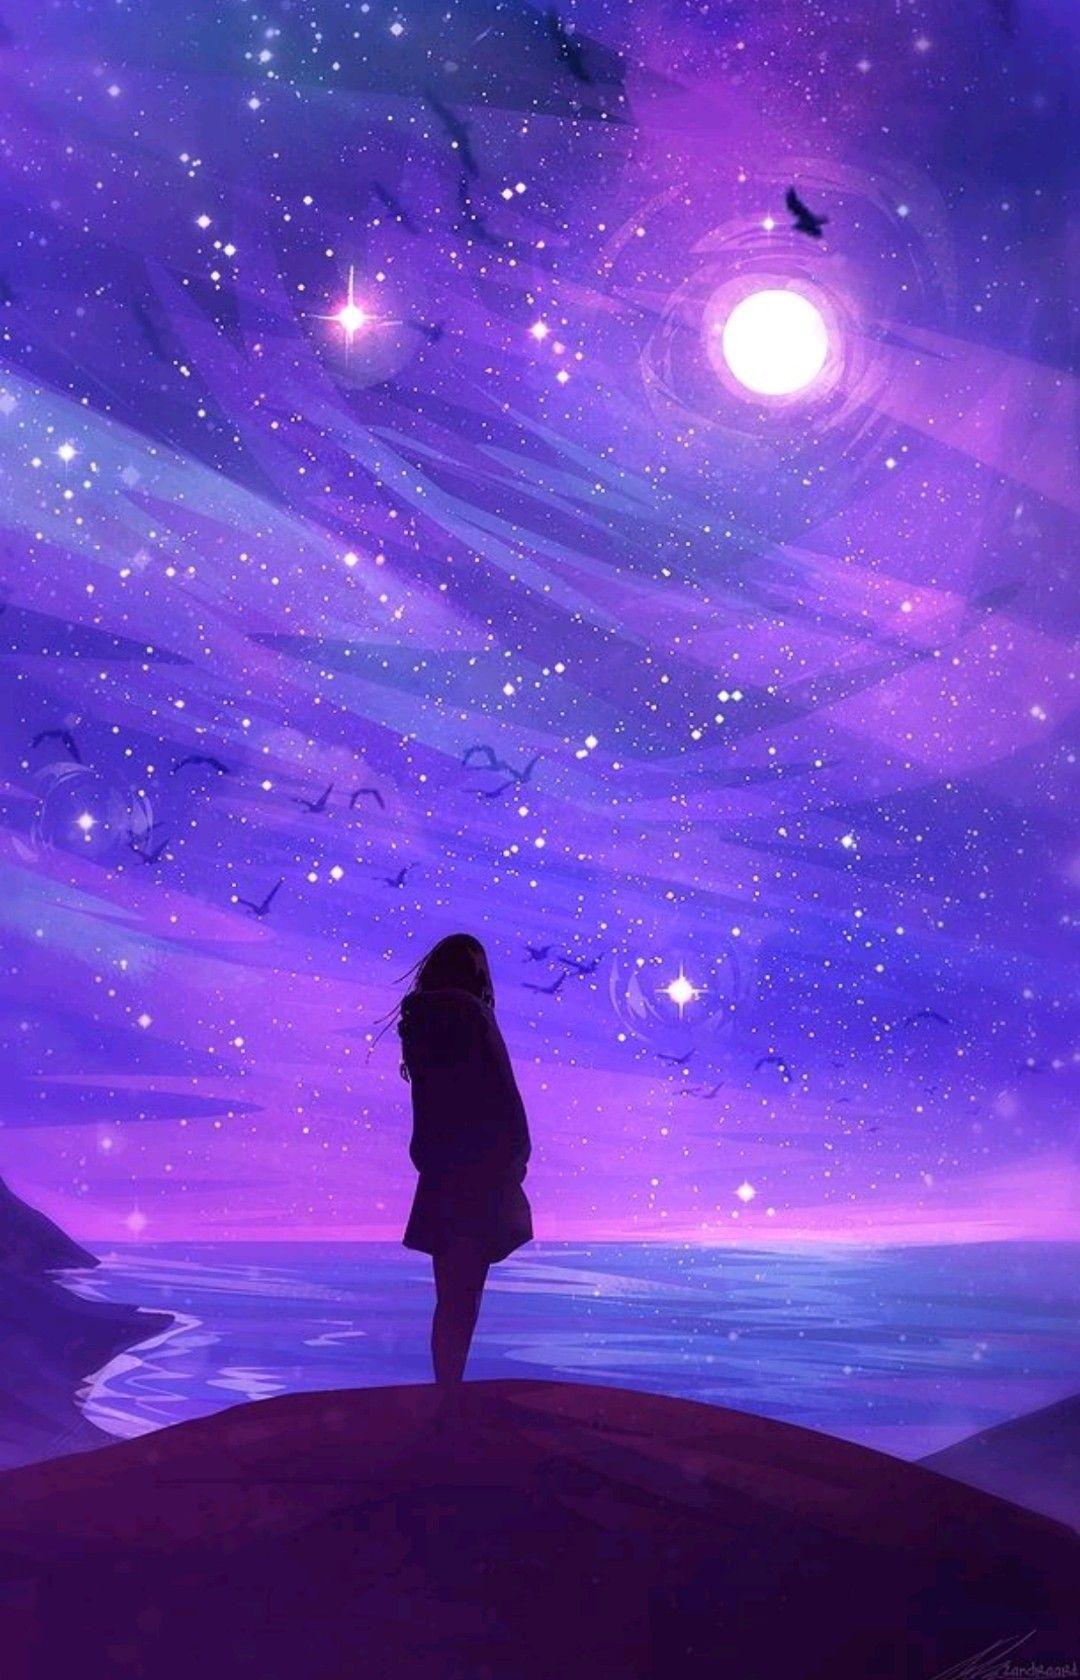 Girl Silhouette. Countless Stars Over the Shore, Shining